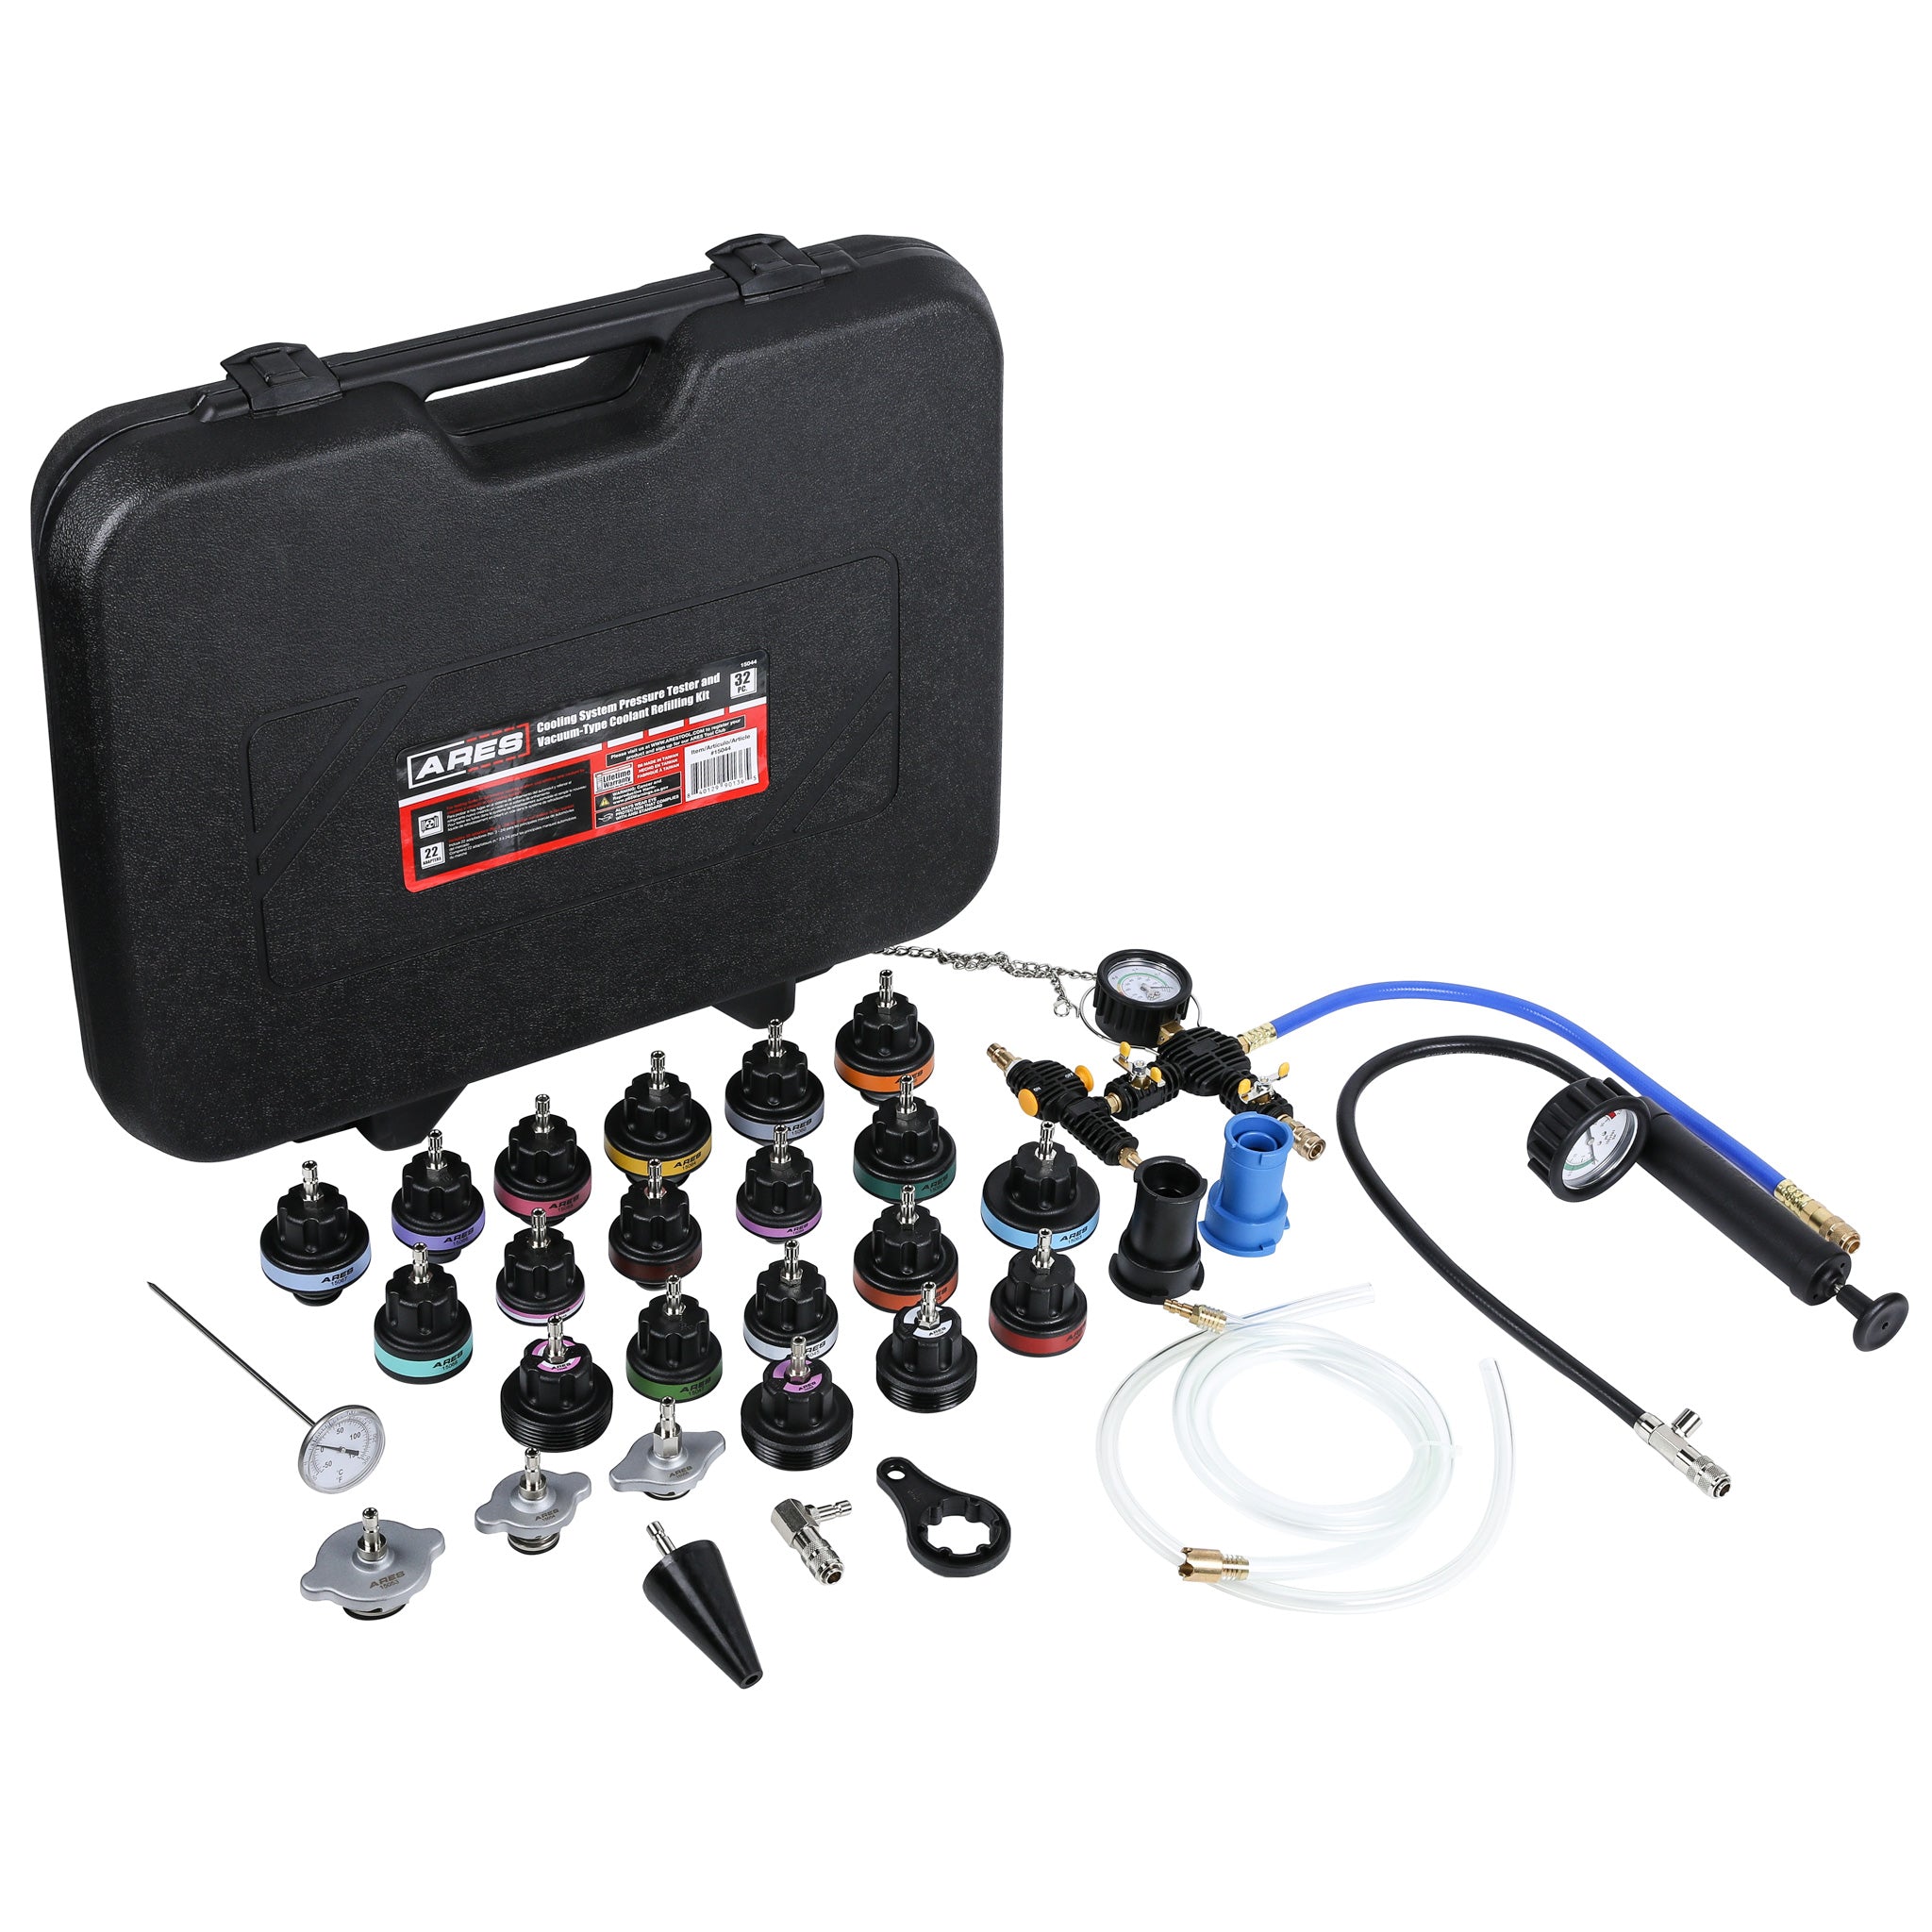 22 Piece Cooling System Pressure Tool Kit - Service and Leak